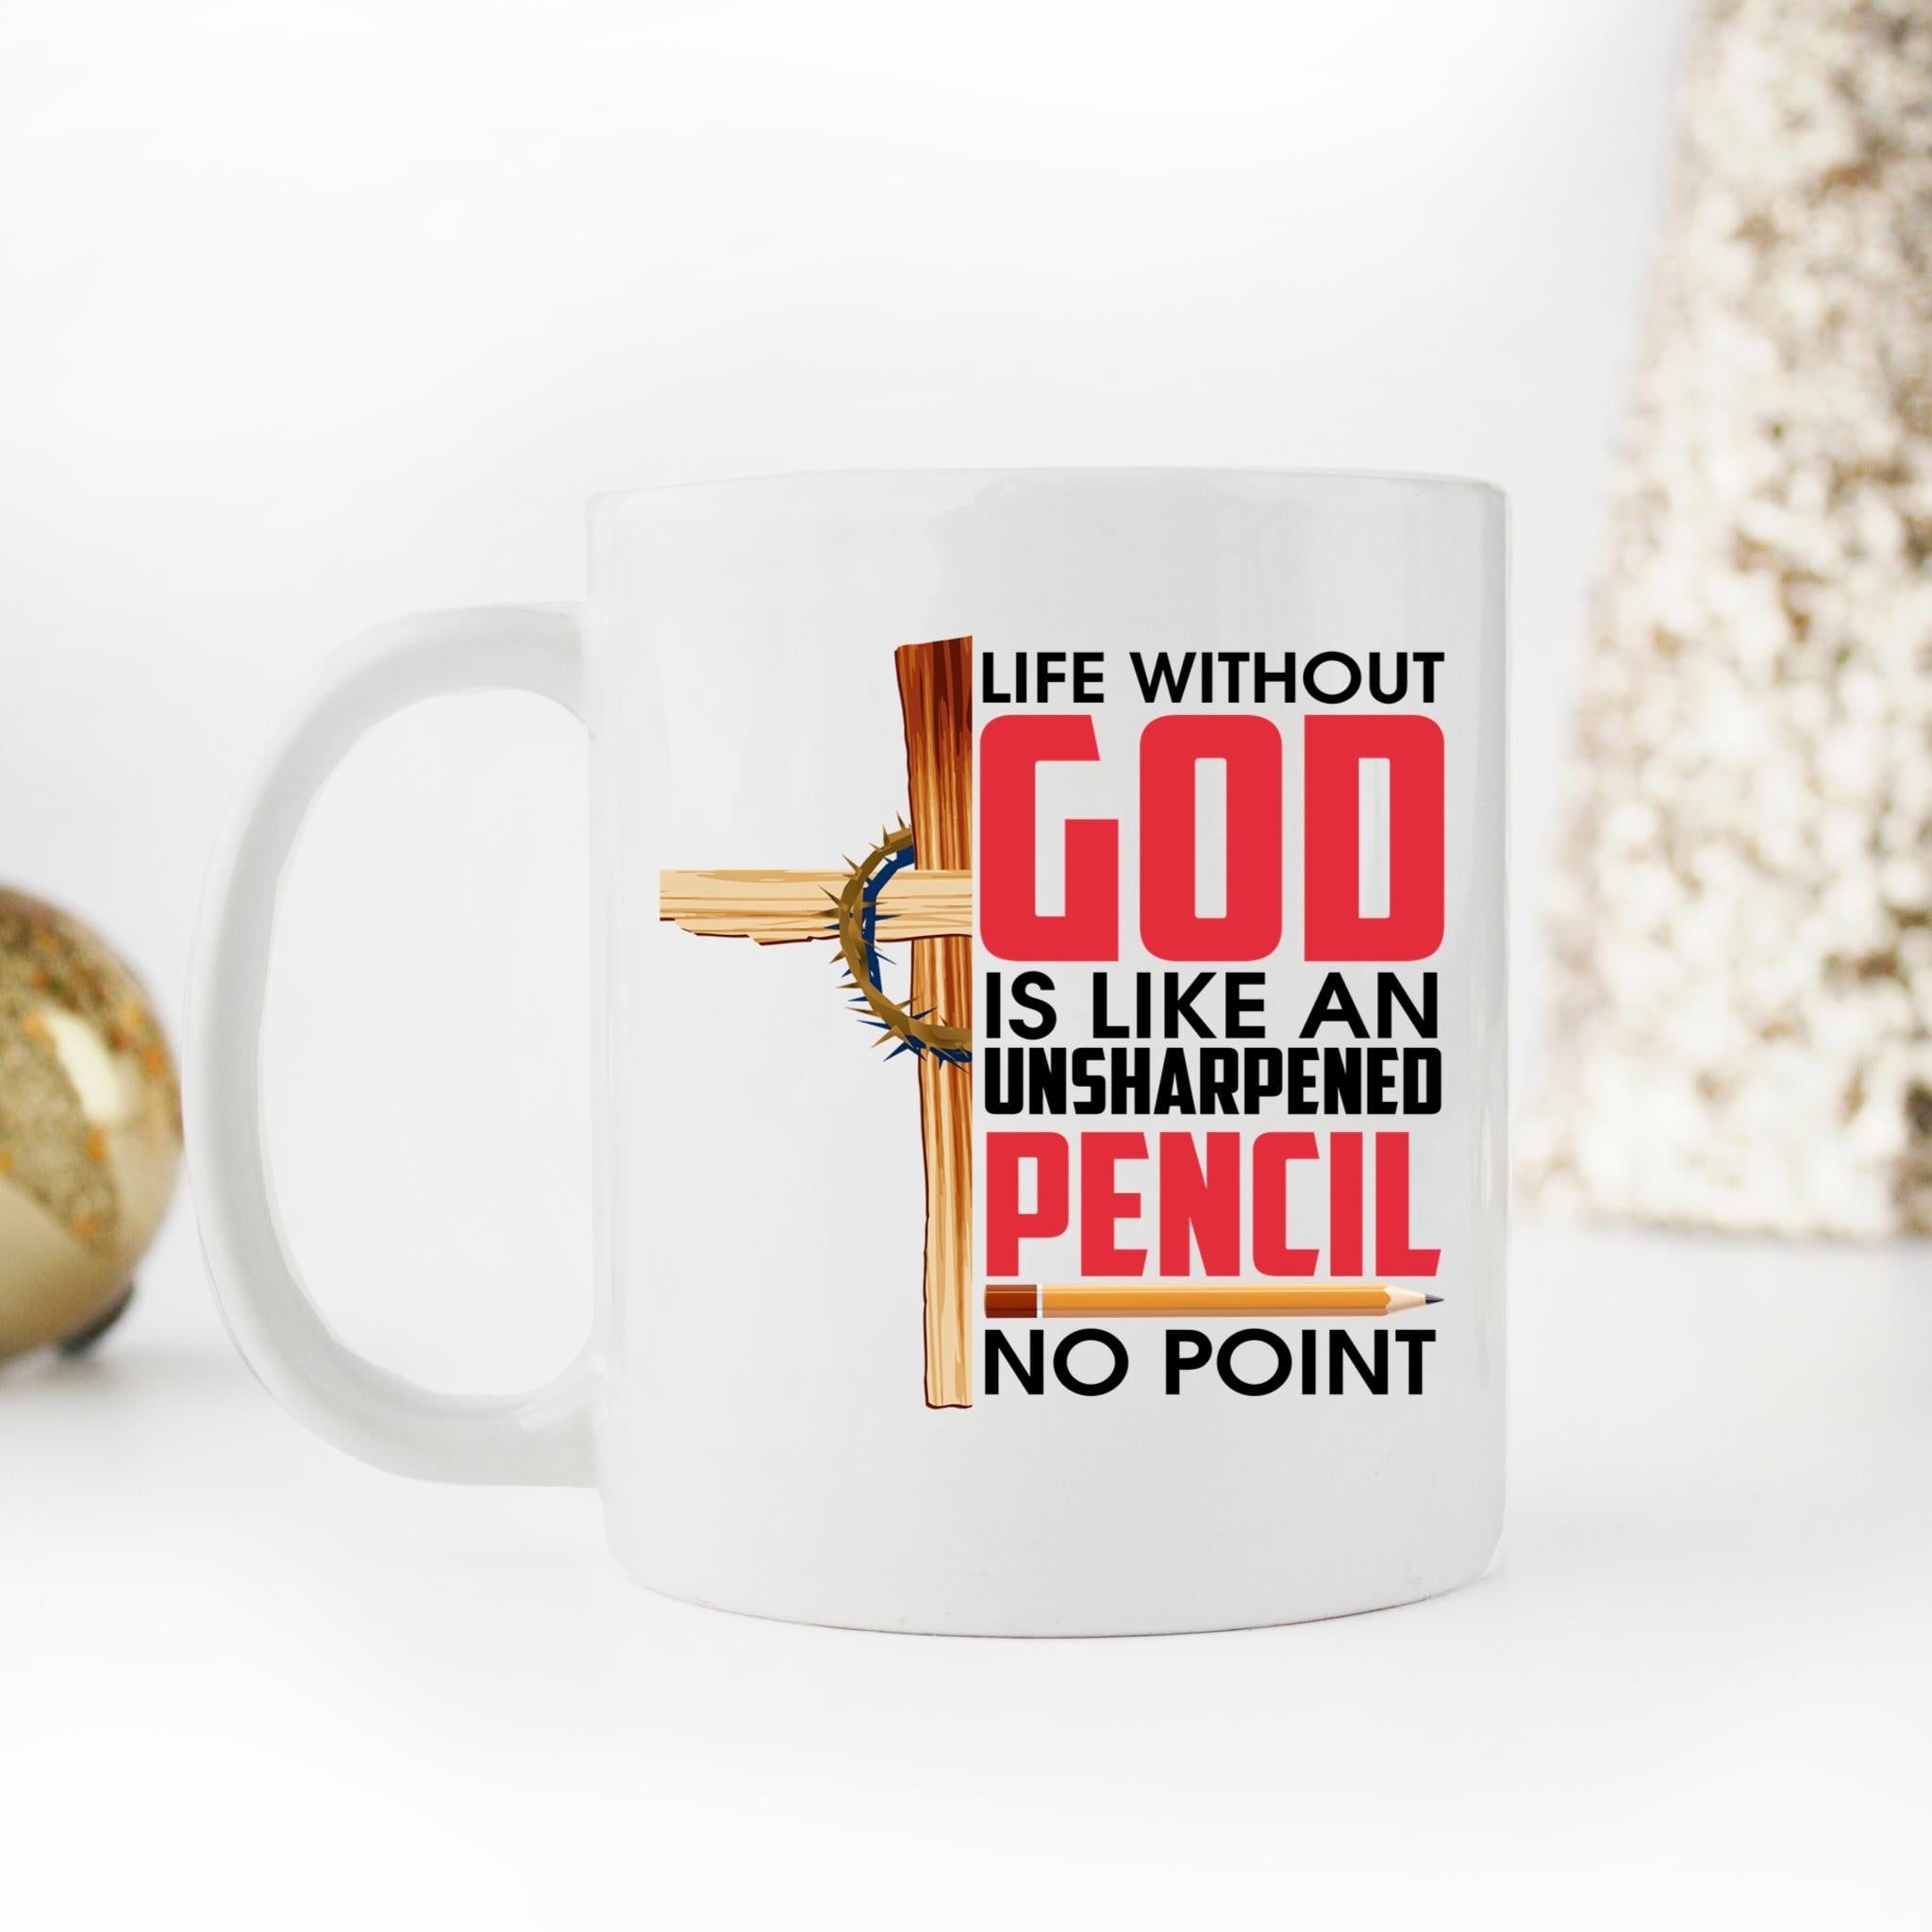 Skitongifts Coffee Mug Funny Ceramic Novelty M86-NH251221-Life Without God Is Like An Unsharpened Pencil Oqptzo7